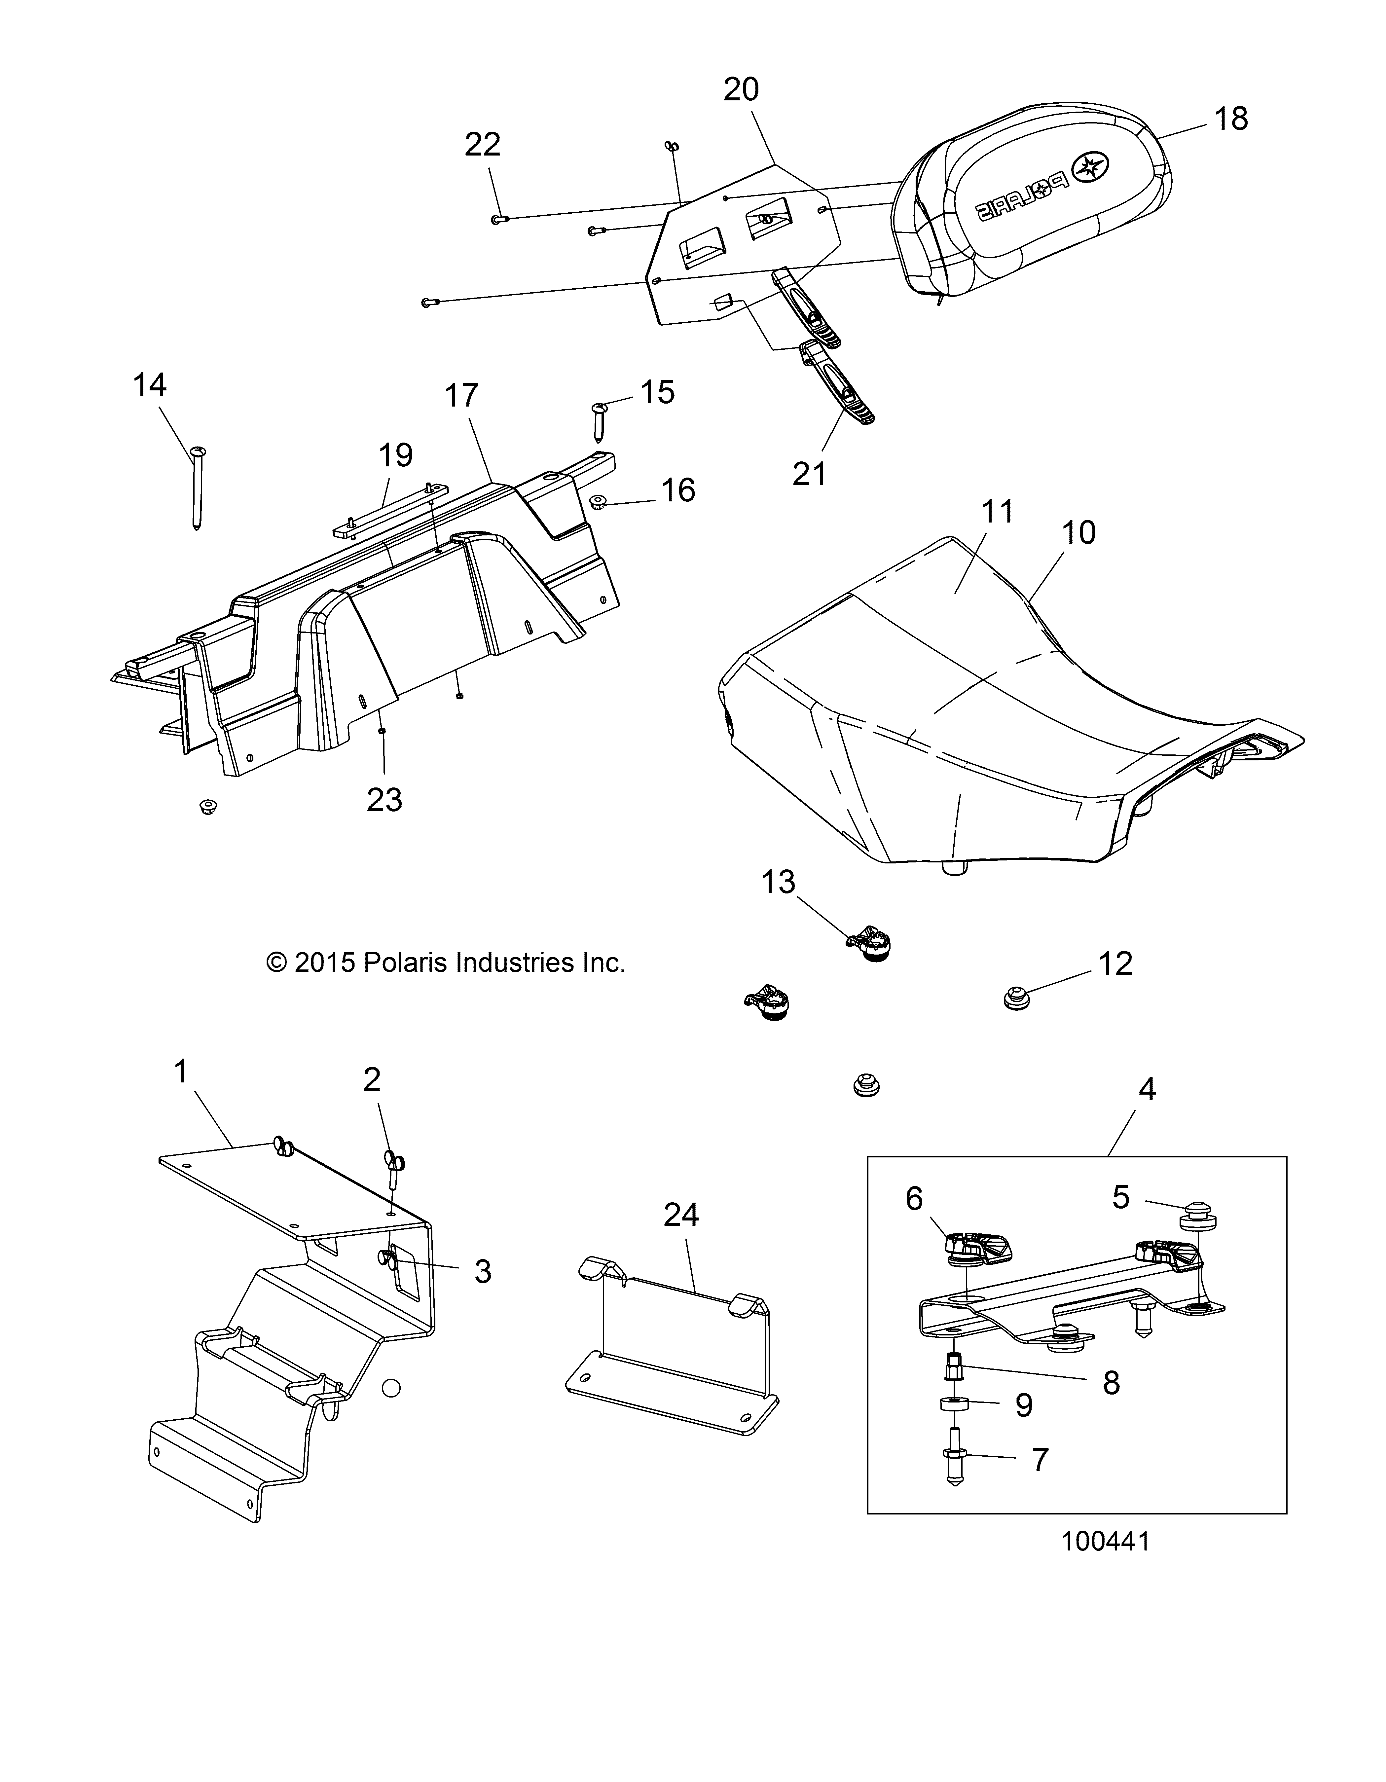 Part Number : 7520417 SCREW-WING M5